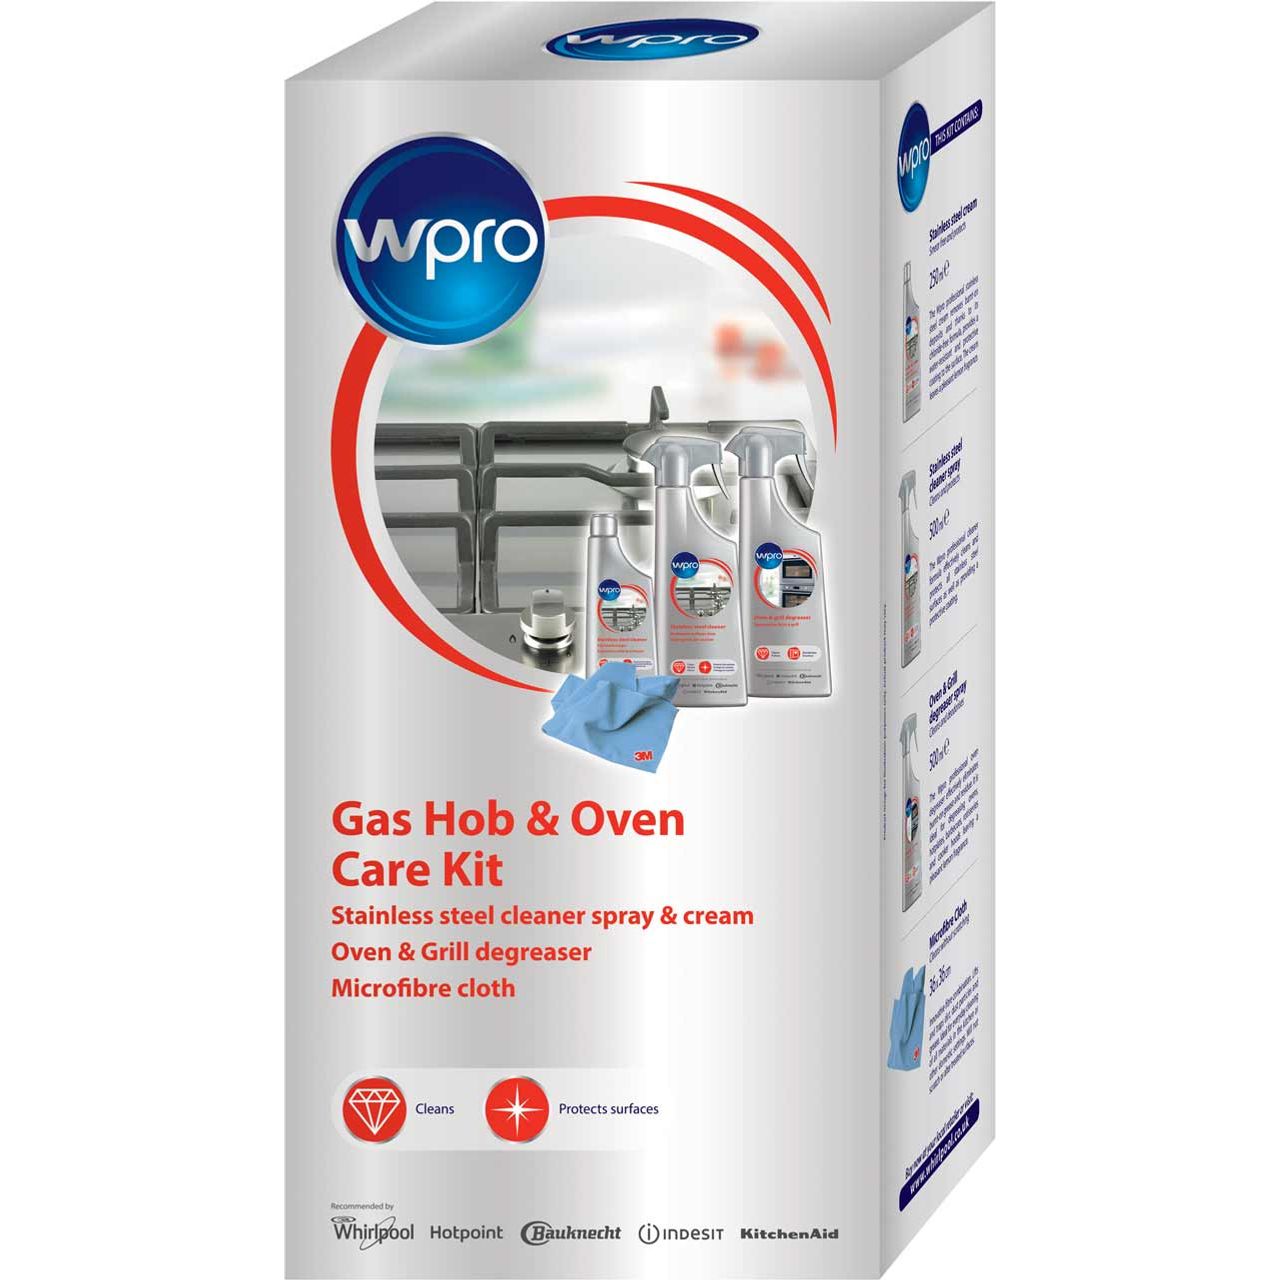 Wpro Gas Hob & Oven Care Pack Review